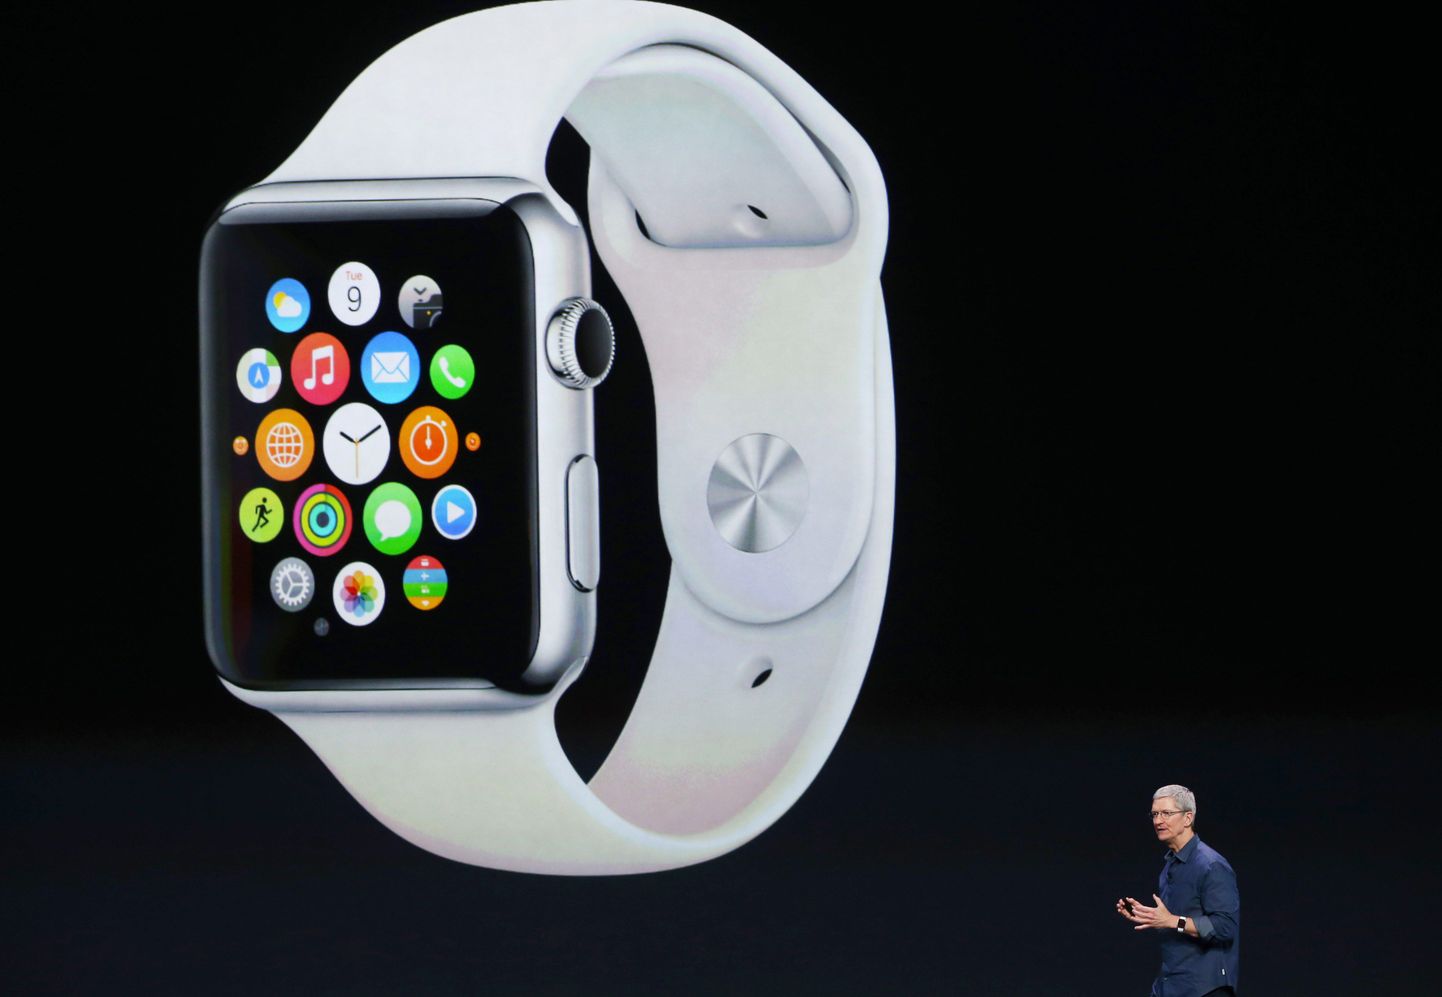 CUPERTINO, CA - SEPTEMBER 09: Apple CEO Tim Cook announces the Apple Watch during an Apple special event at the Flint Center for the Performing Arts on September 9, 2014 in Cupertino, California. Apple unveiled the Apple Watch wearable tech and two new iPhones, the iPhone 6 and iPhone 6 Plus.   Justin Sullivan/Getty Images/AFP
== FOR NEWSPAPERS, INTERNET, TELCOS & TELEVISION USE ONLY ==